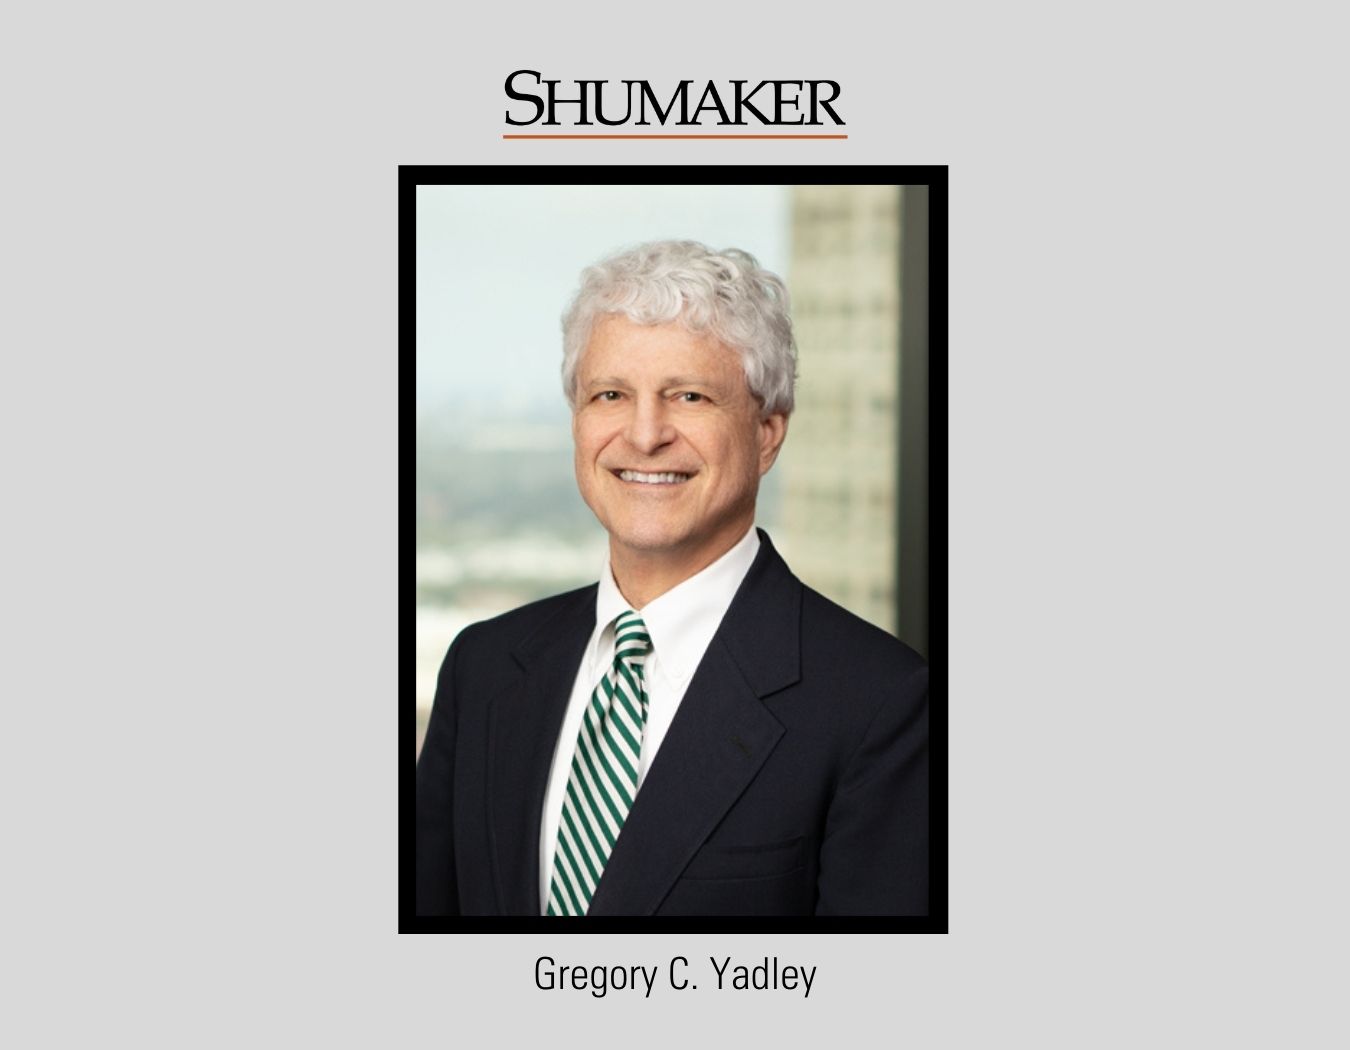 Tampa Partner Gregory Yadley Re-Elected Secretary of the U.S. Securities and Exchange Commission's Small Business Capital Formation Advisory Committee